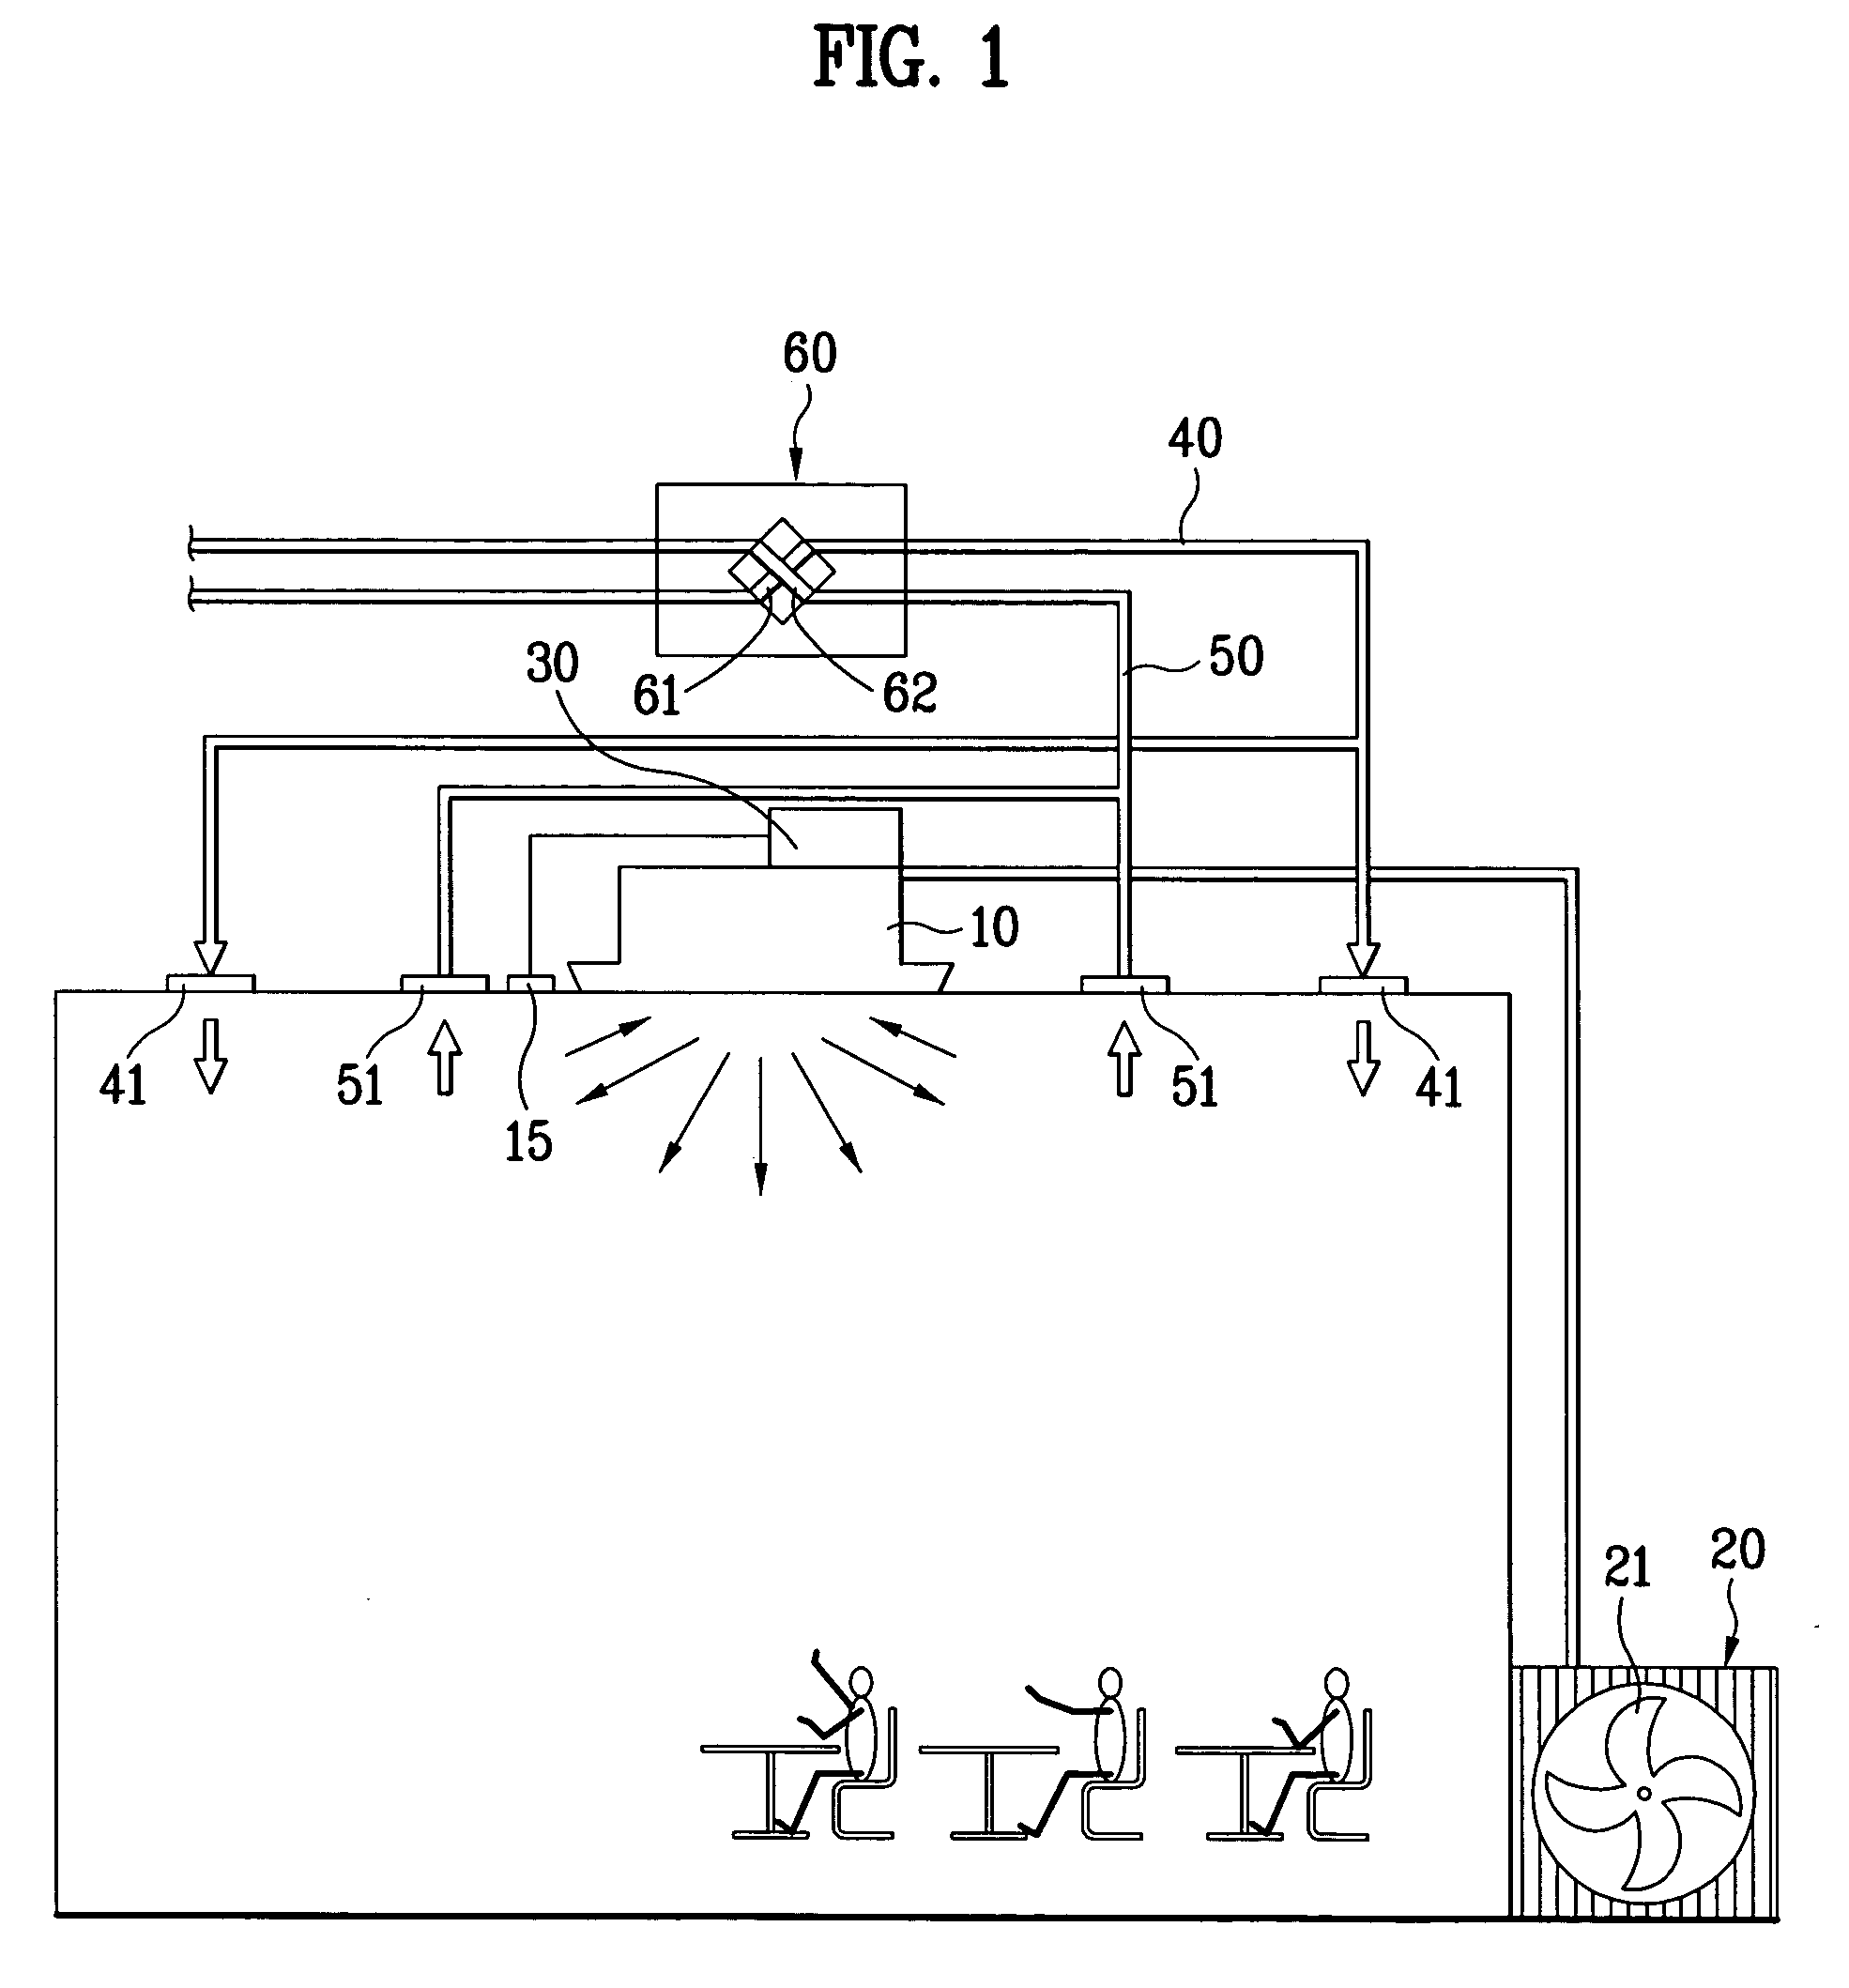 Method for controling air flow rate of air conditioning system